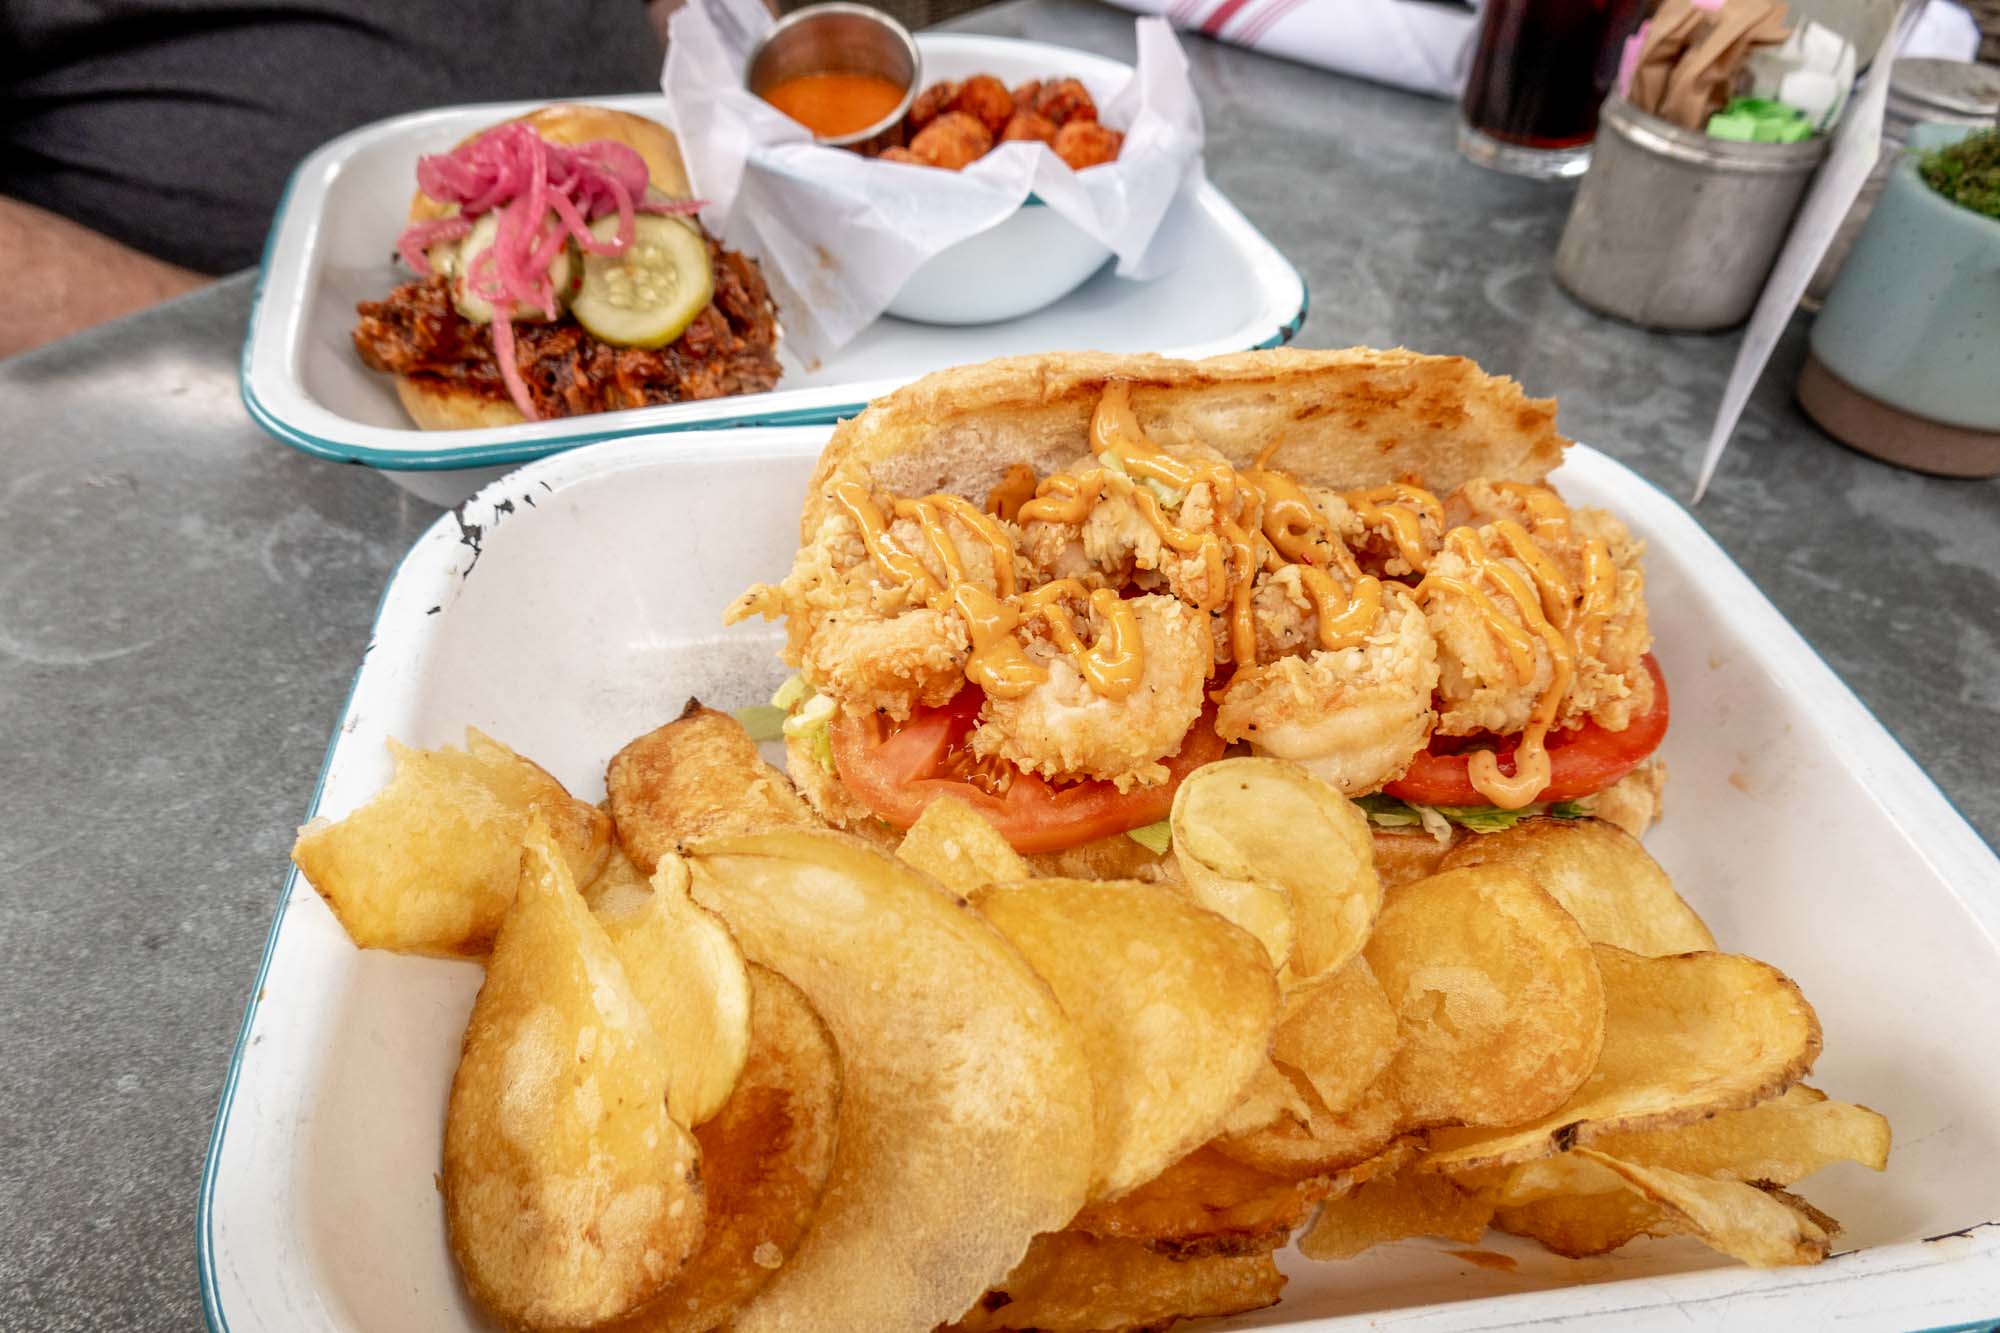 Shrimp poboy and potato chips on a plate beside a pulled pork sandwich